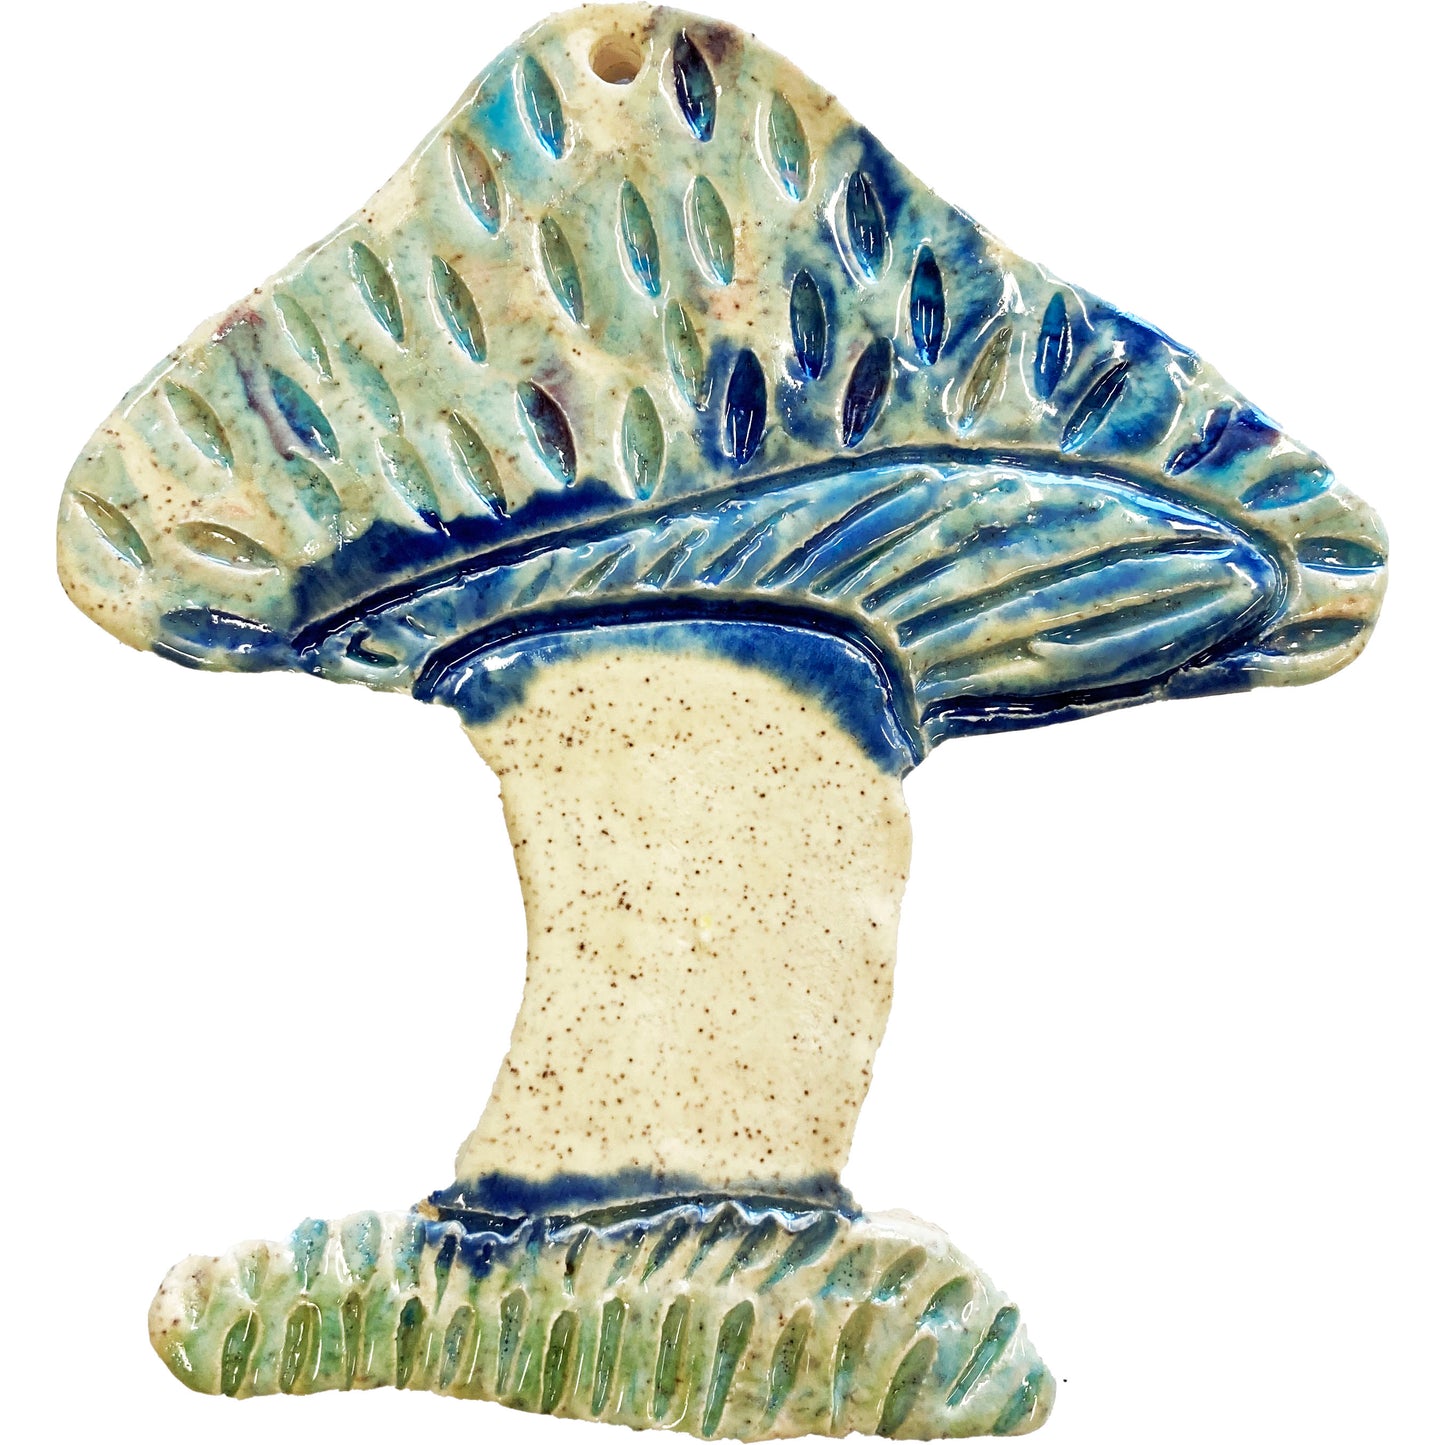 WATCH Resources Art Guild - Ceramic Arts Handmade Clay Crafts 5-inch x 4.5-inch Glazed Lizard made by Lisa Uptain and Jennifer Horne